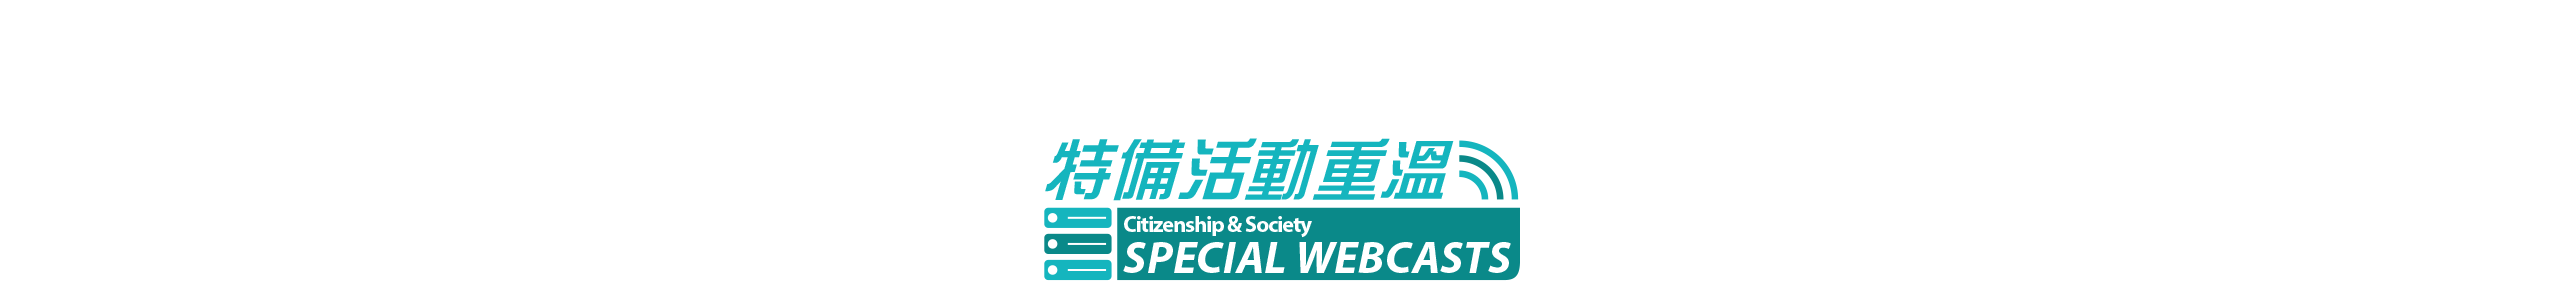 Special Webcasts 特备活动重温